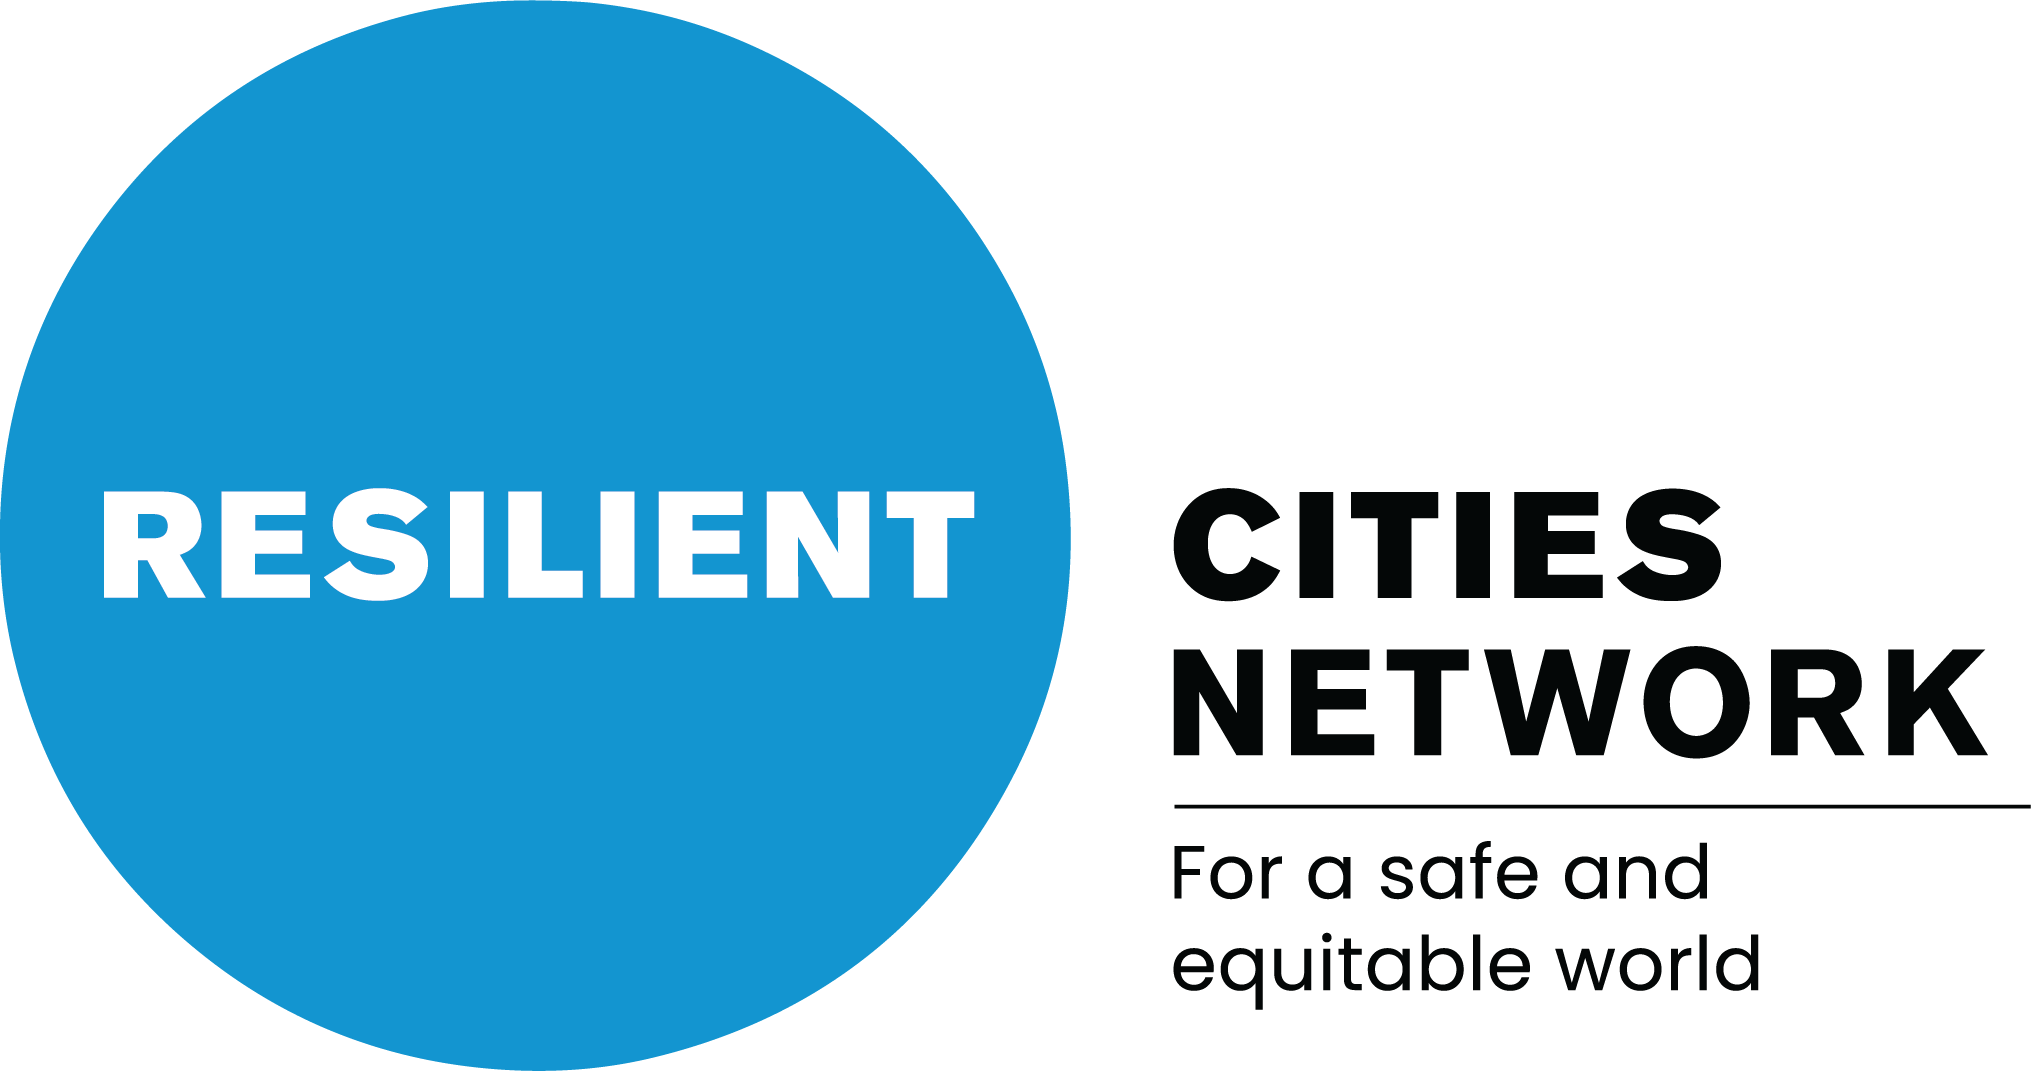 RESILIENT CITIES NETWORK